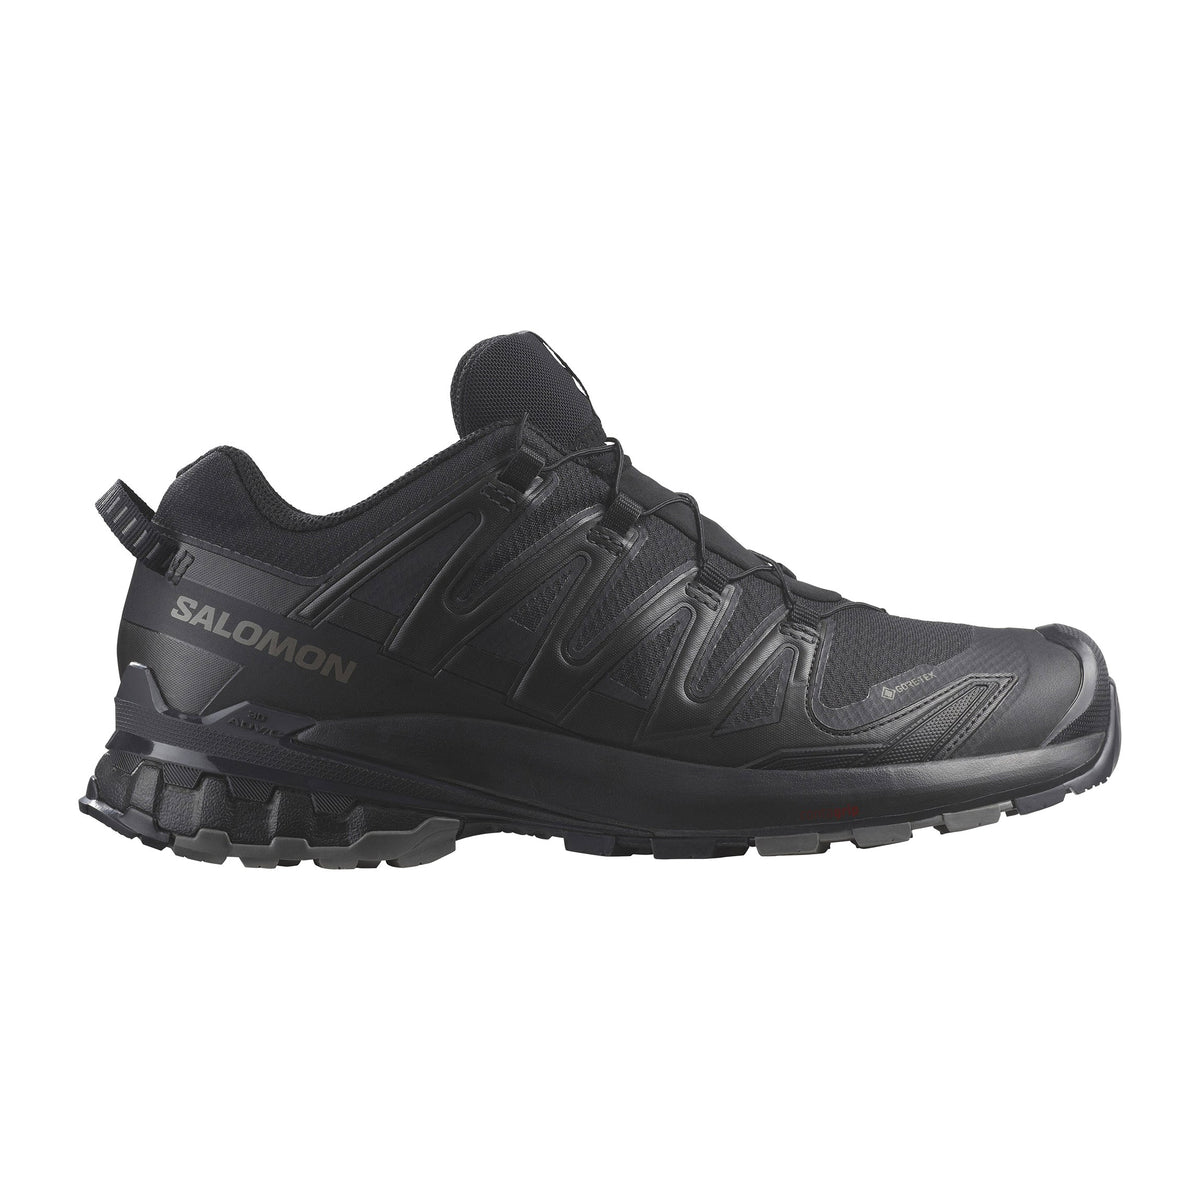 A black Salomon XA Pro 3D V9 GTX hiking shoe featuring the brand logo on the side and equipped with Gore-Tex technology.